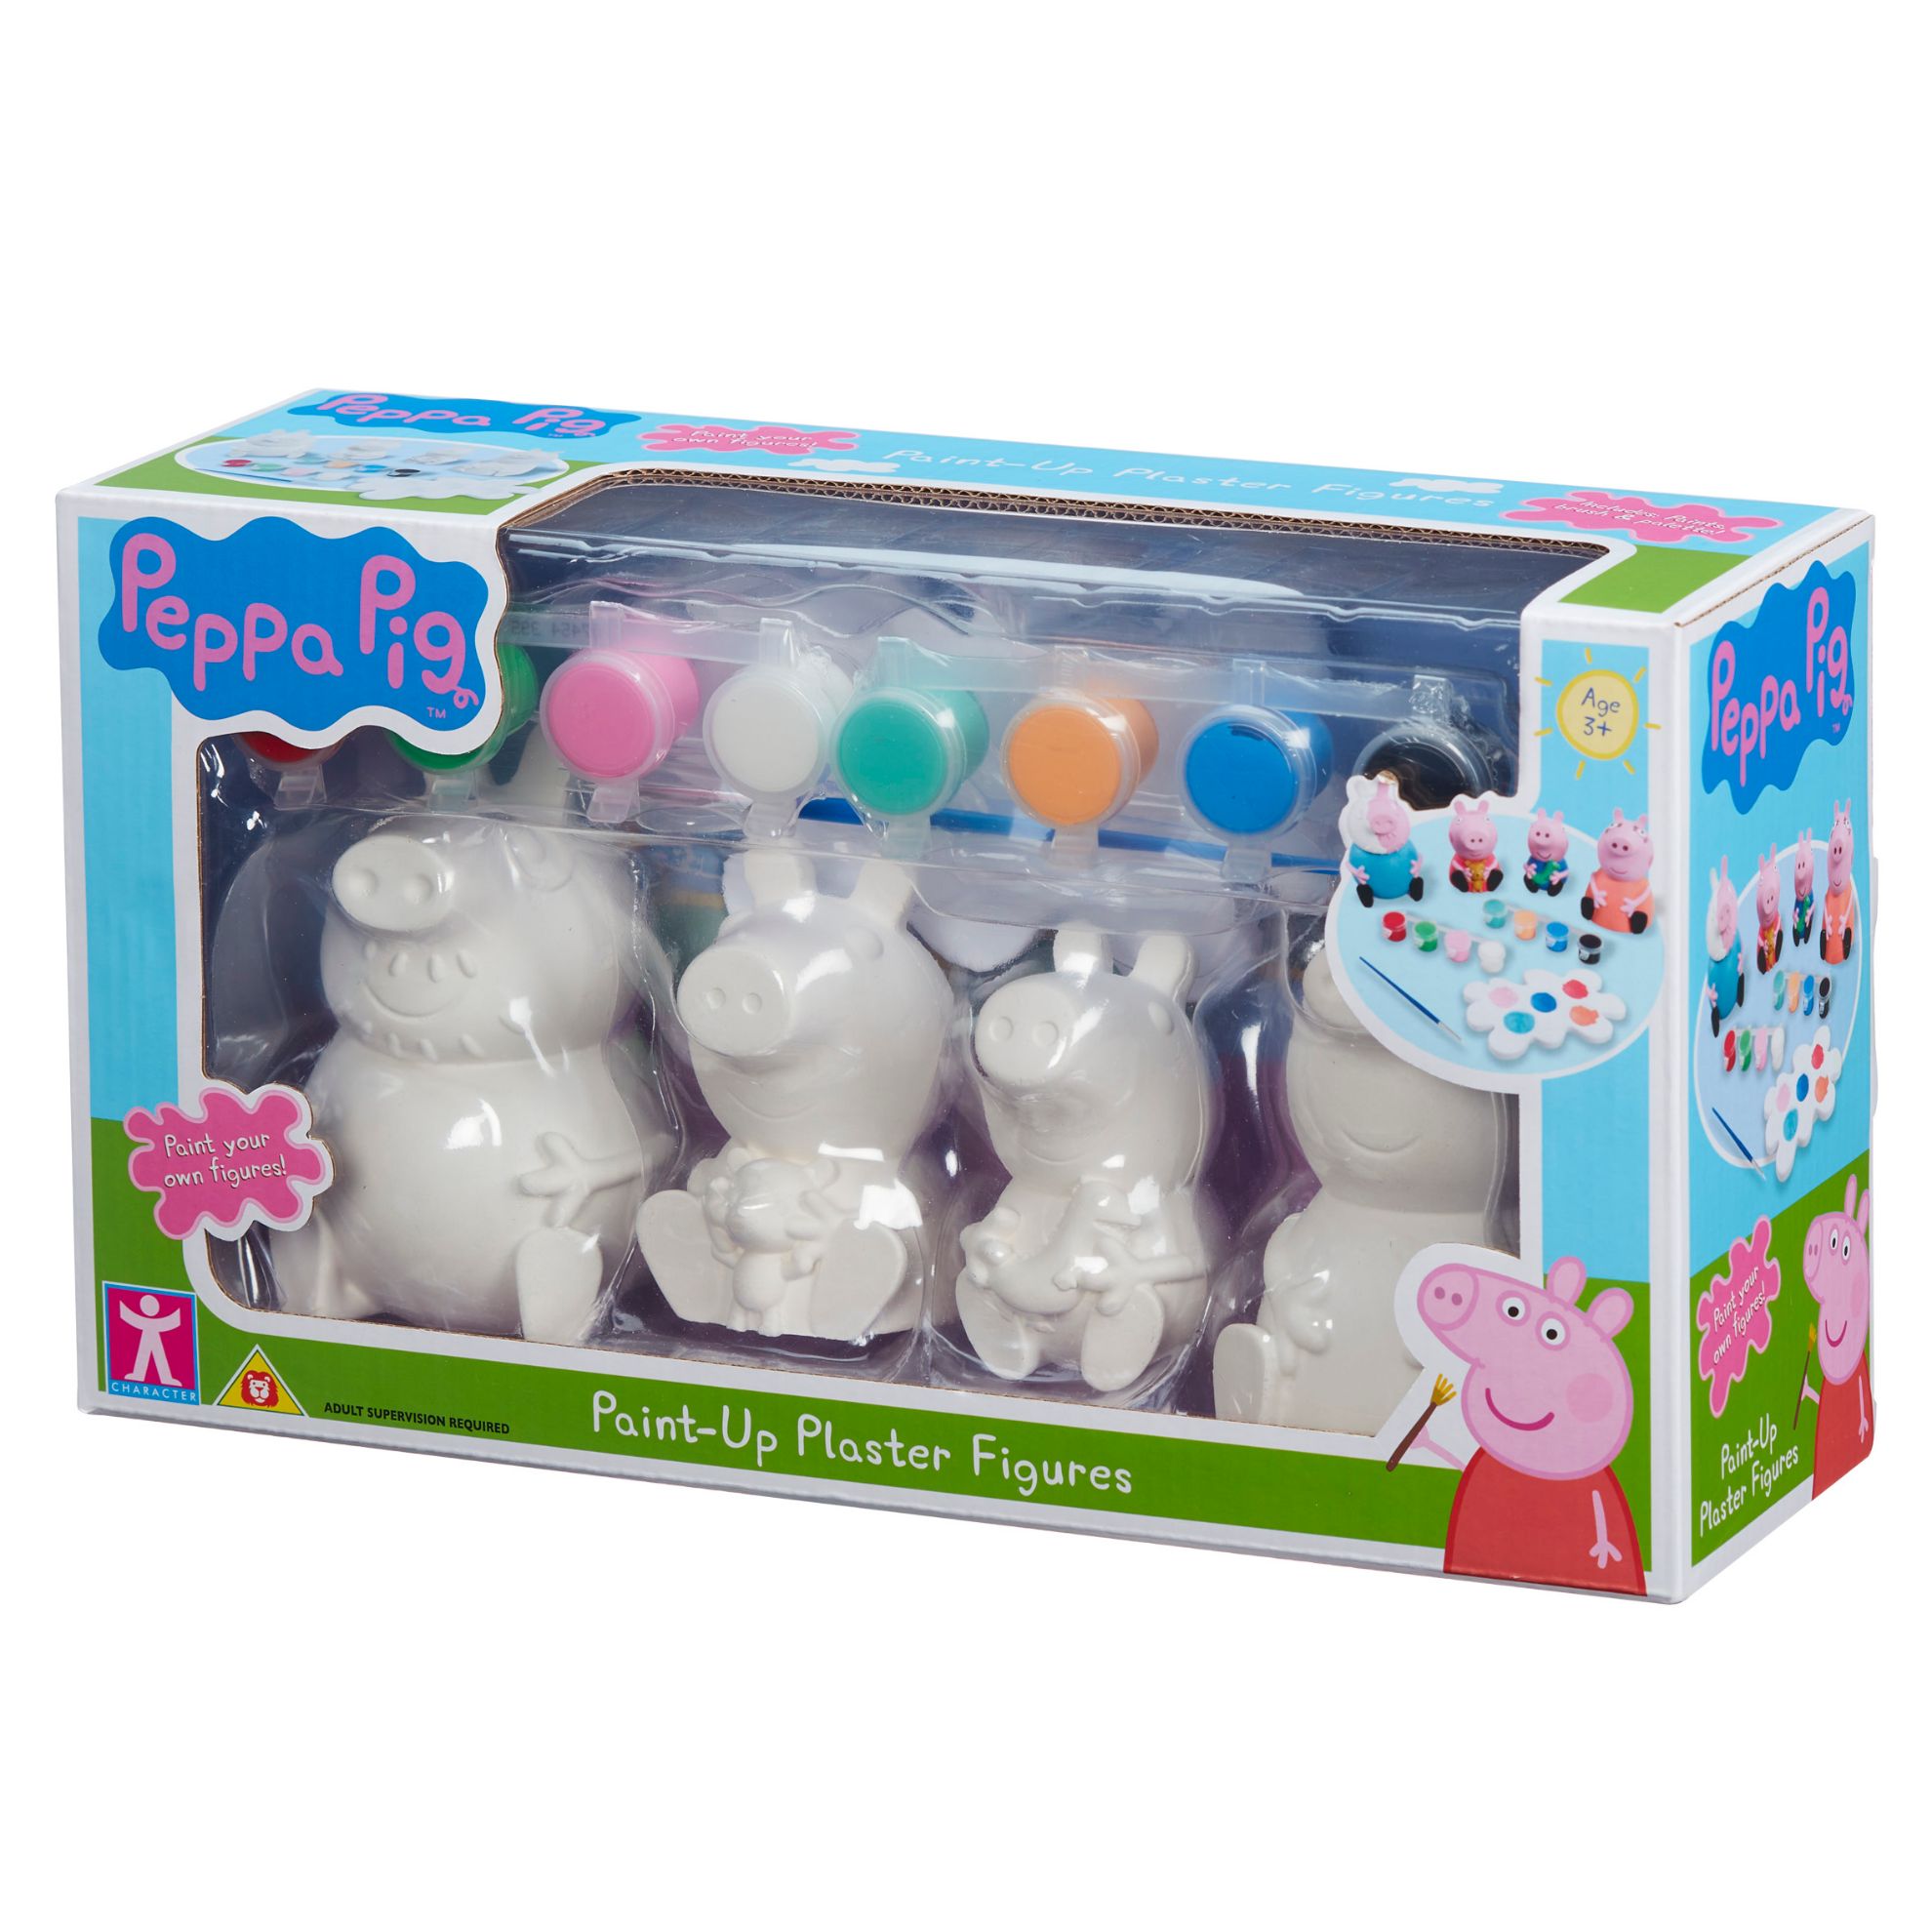 Picture of Peppa Pig Paint-Up Plaster Figures 